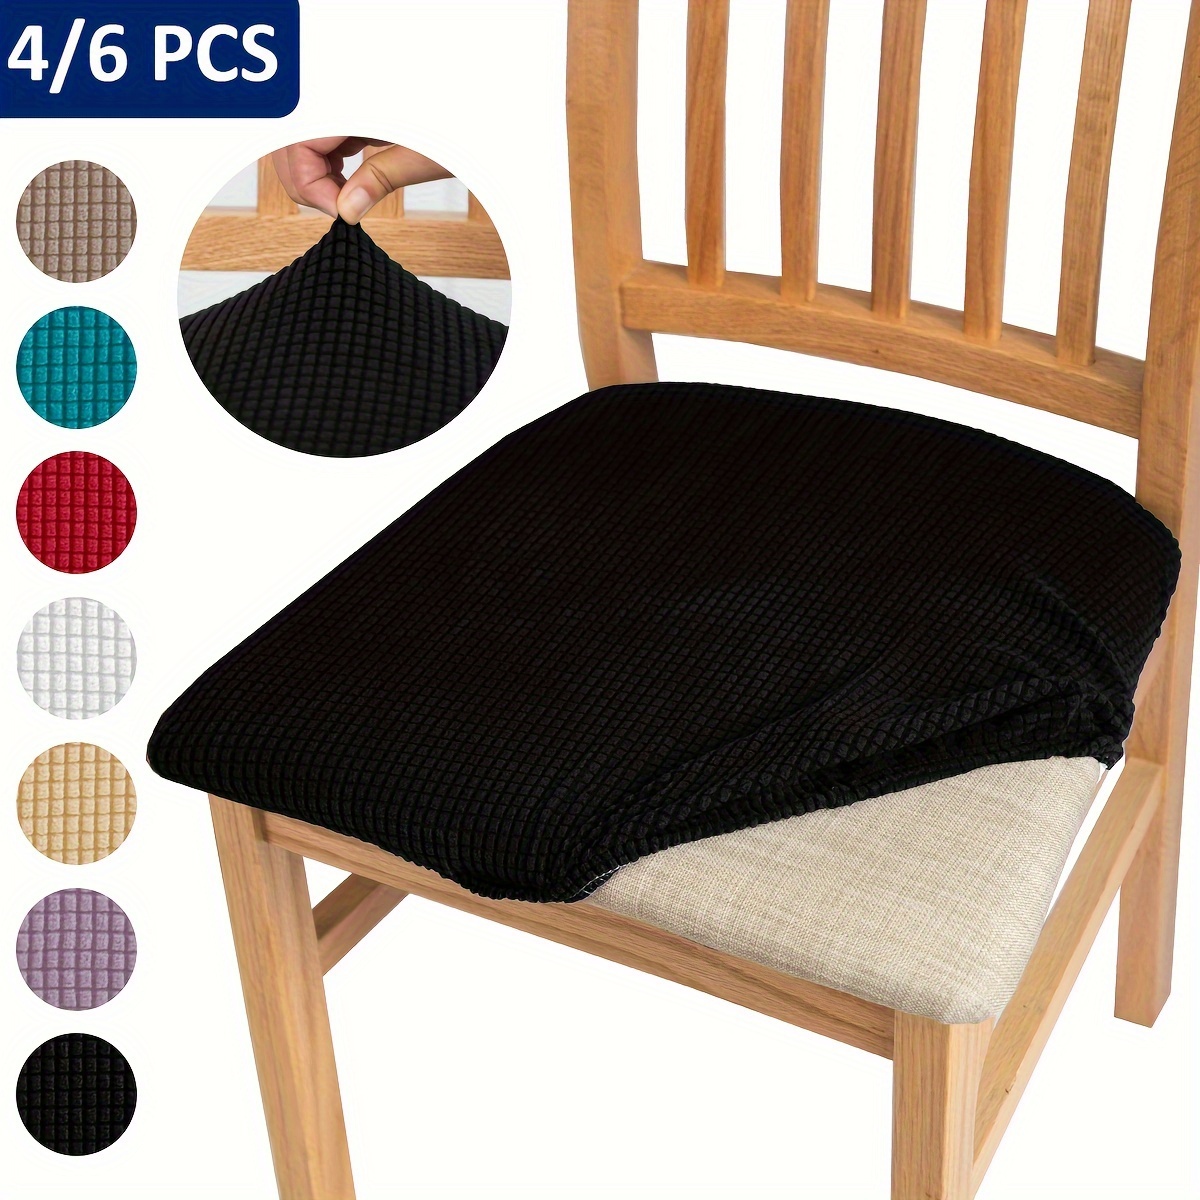 

4/6pcs Chair Seat Slipcovers, Stretch Dining Chair Cushion Cover, Furniture Protective Cover, For Dining Room Living Room Office Home Decor